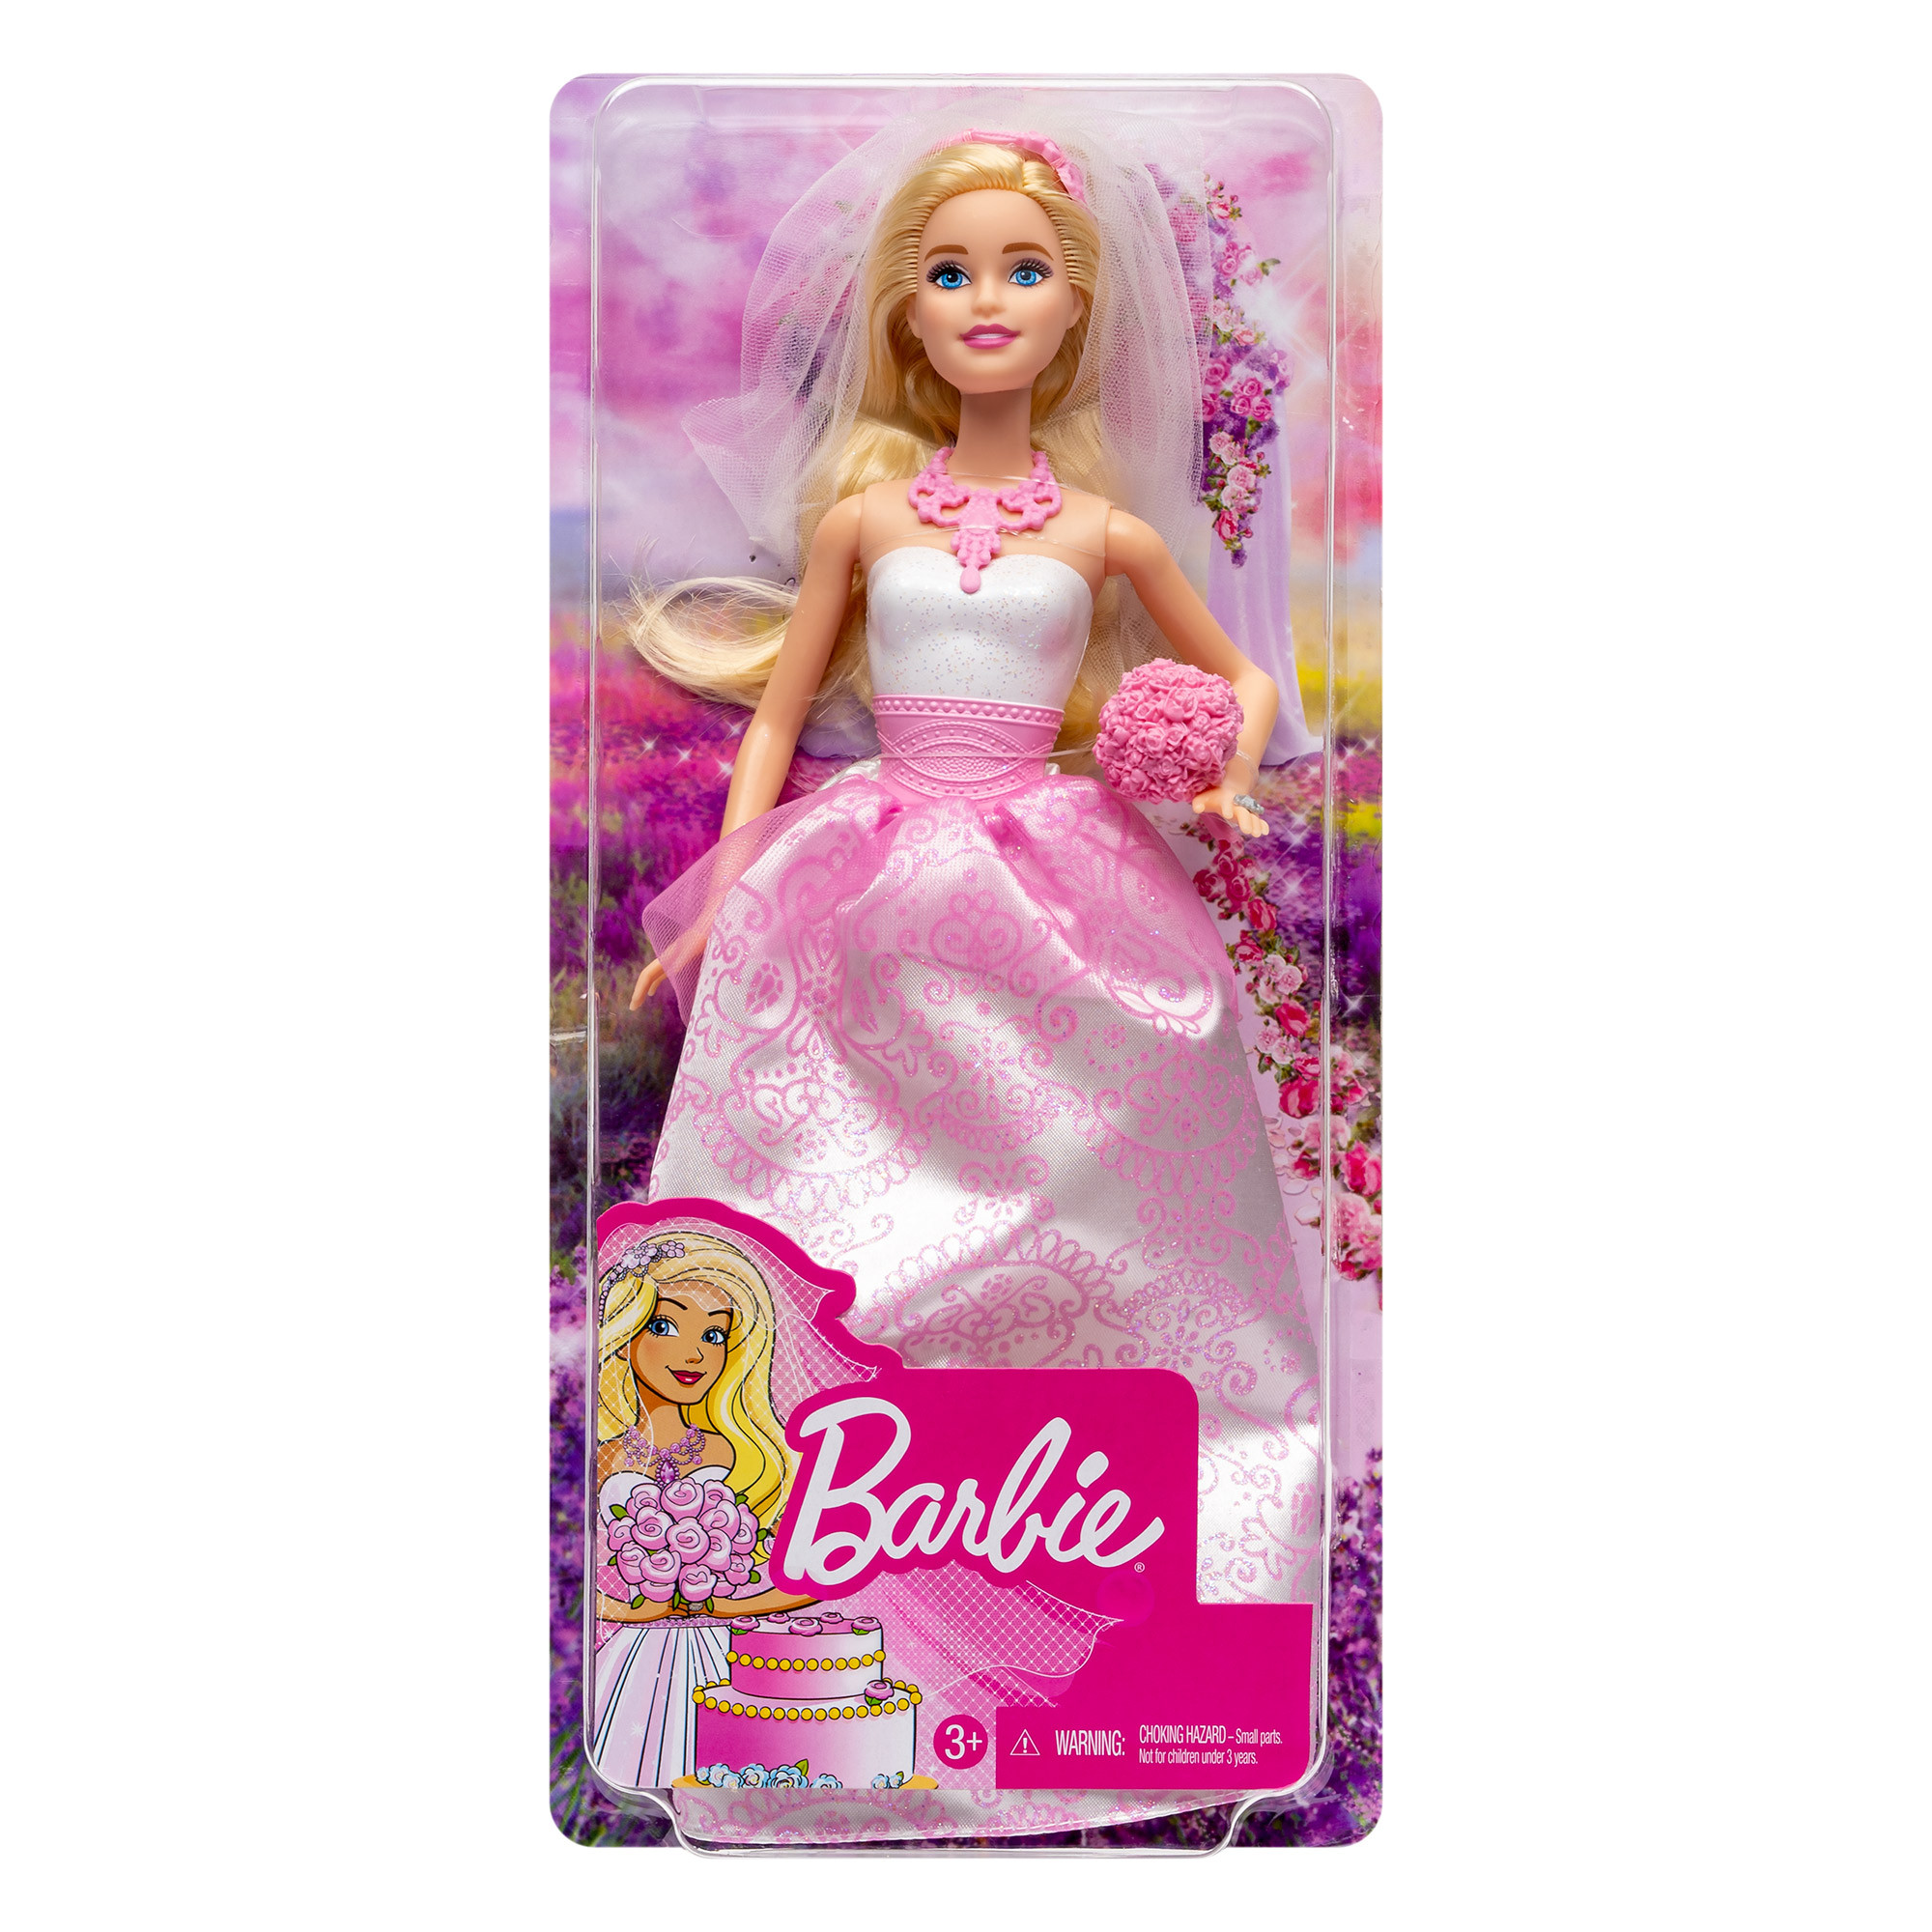 Barbie Bride Doll in Fairytale Wedding Dress with Veil, Bouquet and  Accessories 